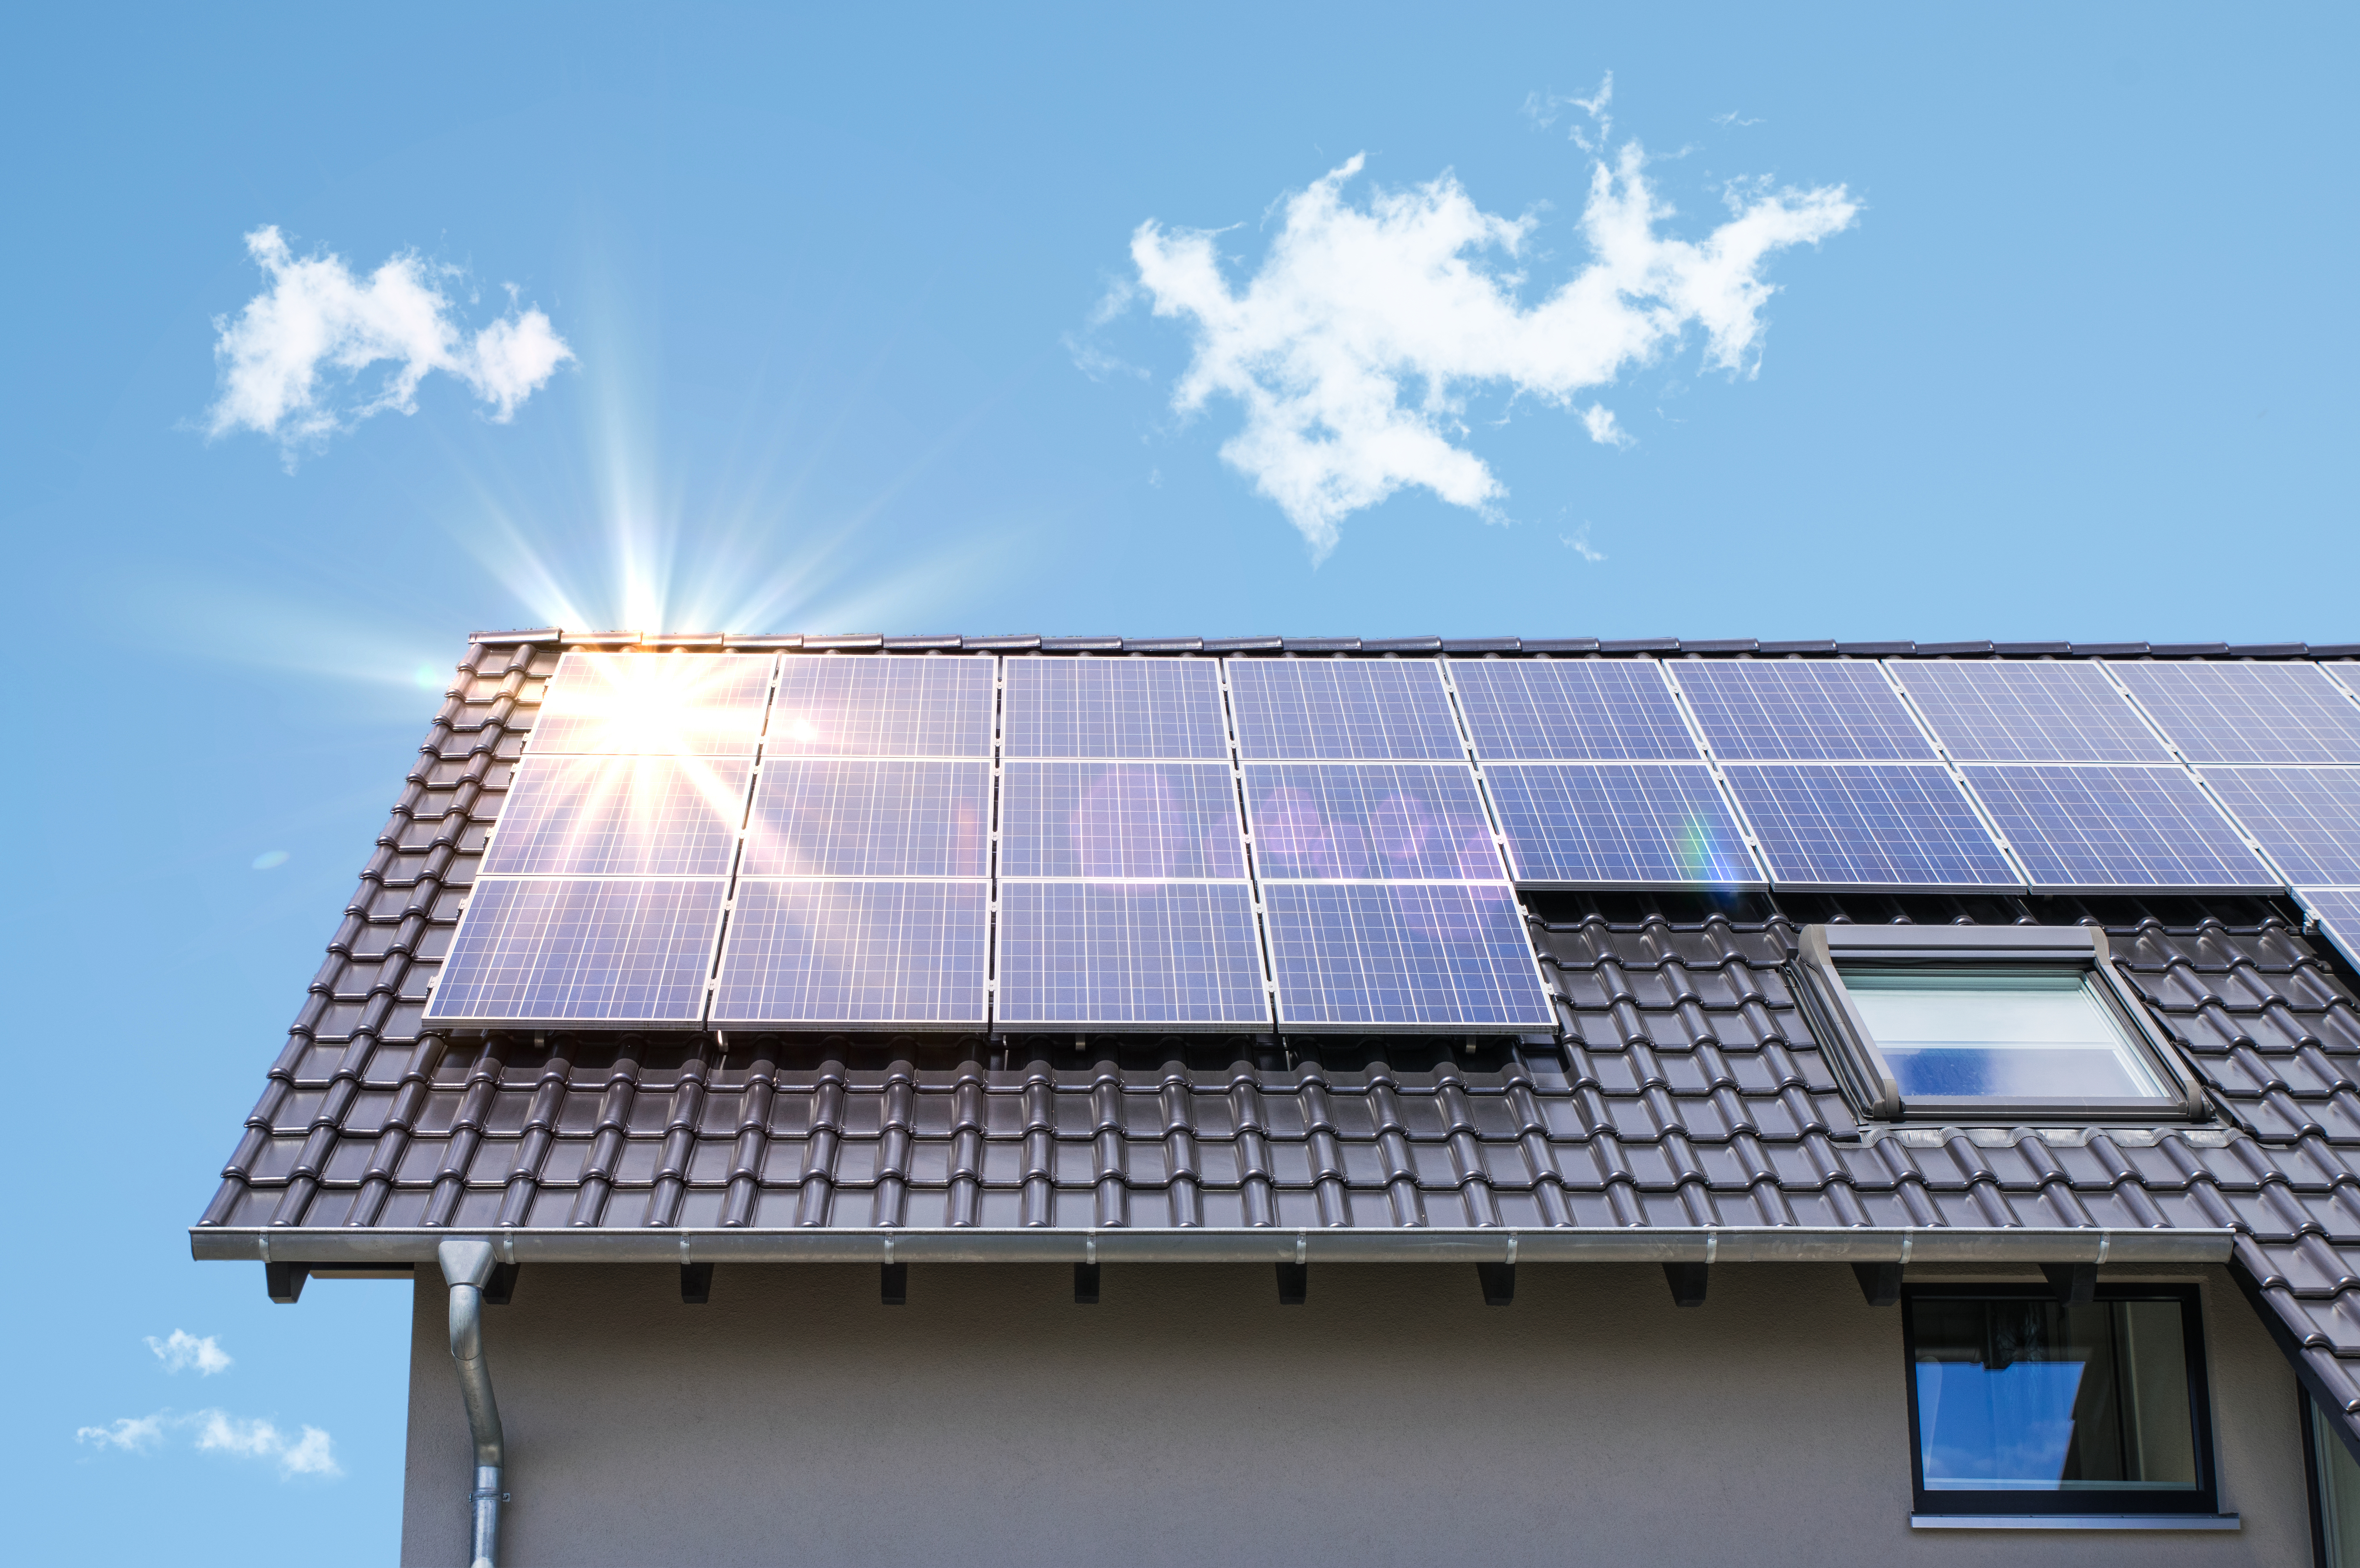 Solar ROI: How to Calculate Solar Panel Costs and Savings